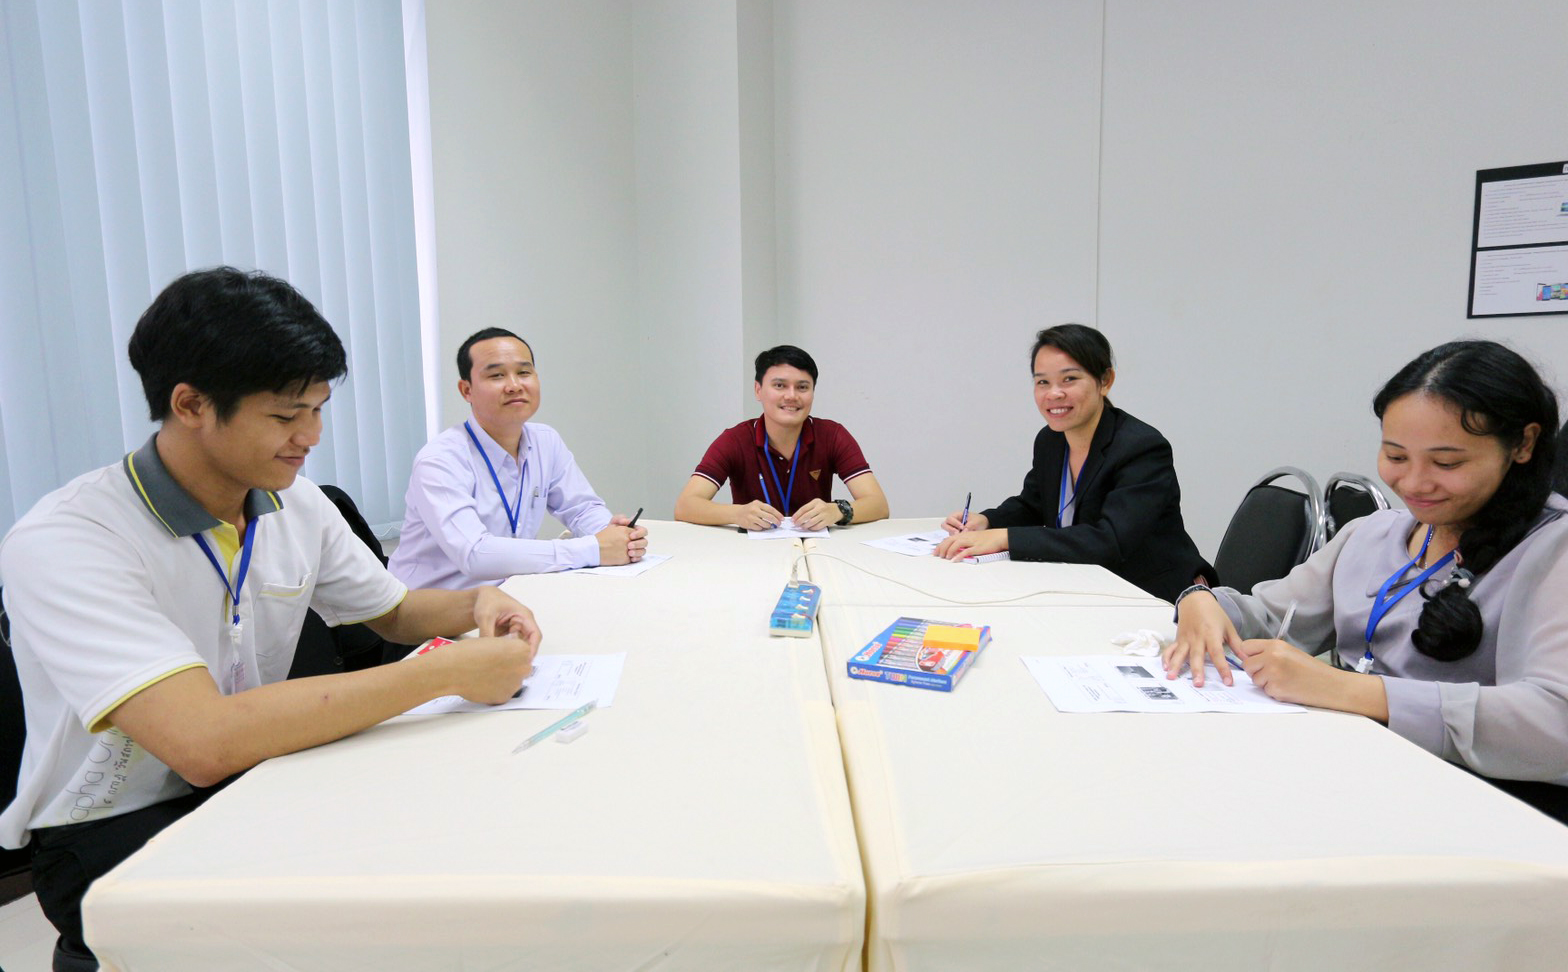 Five Thai teacher students trained by Wintec